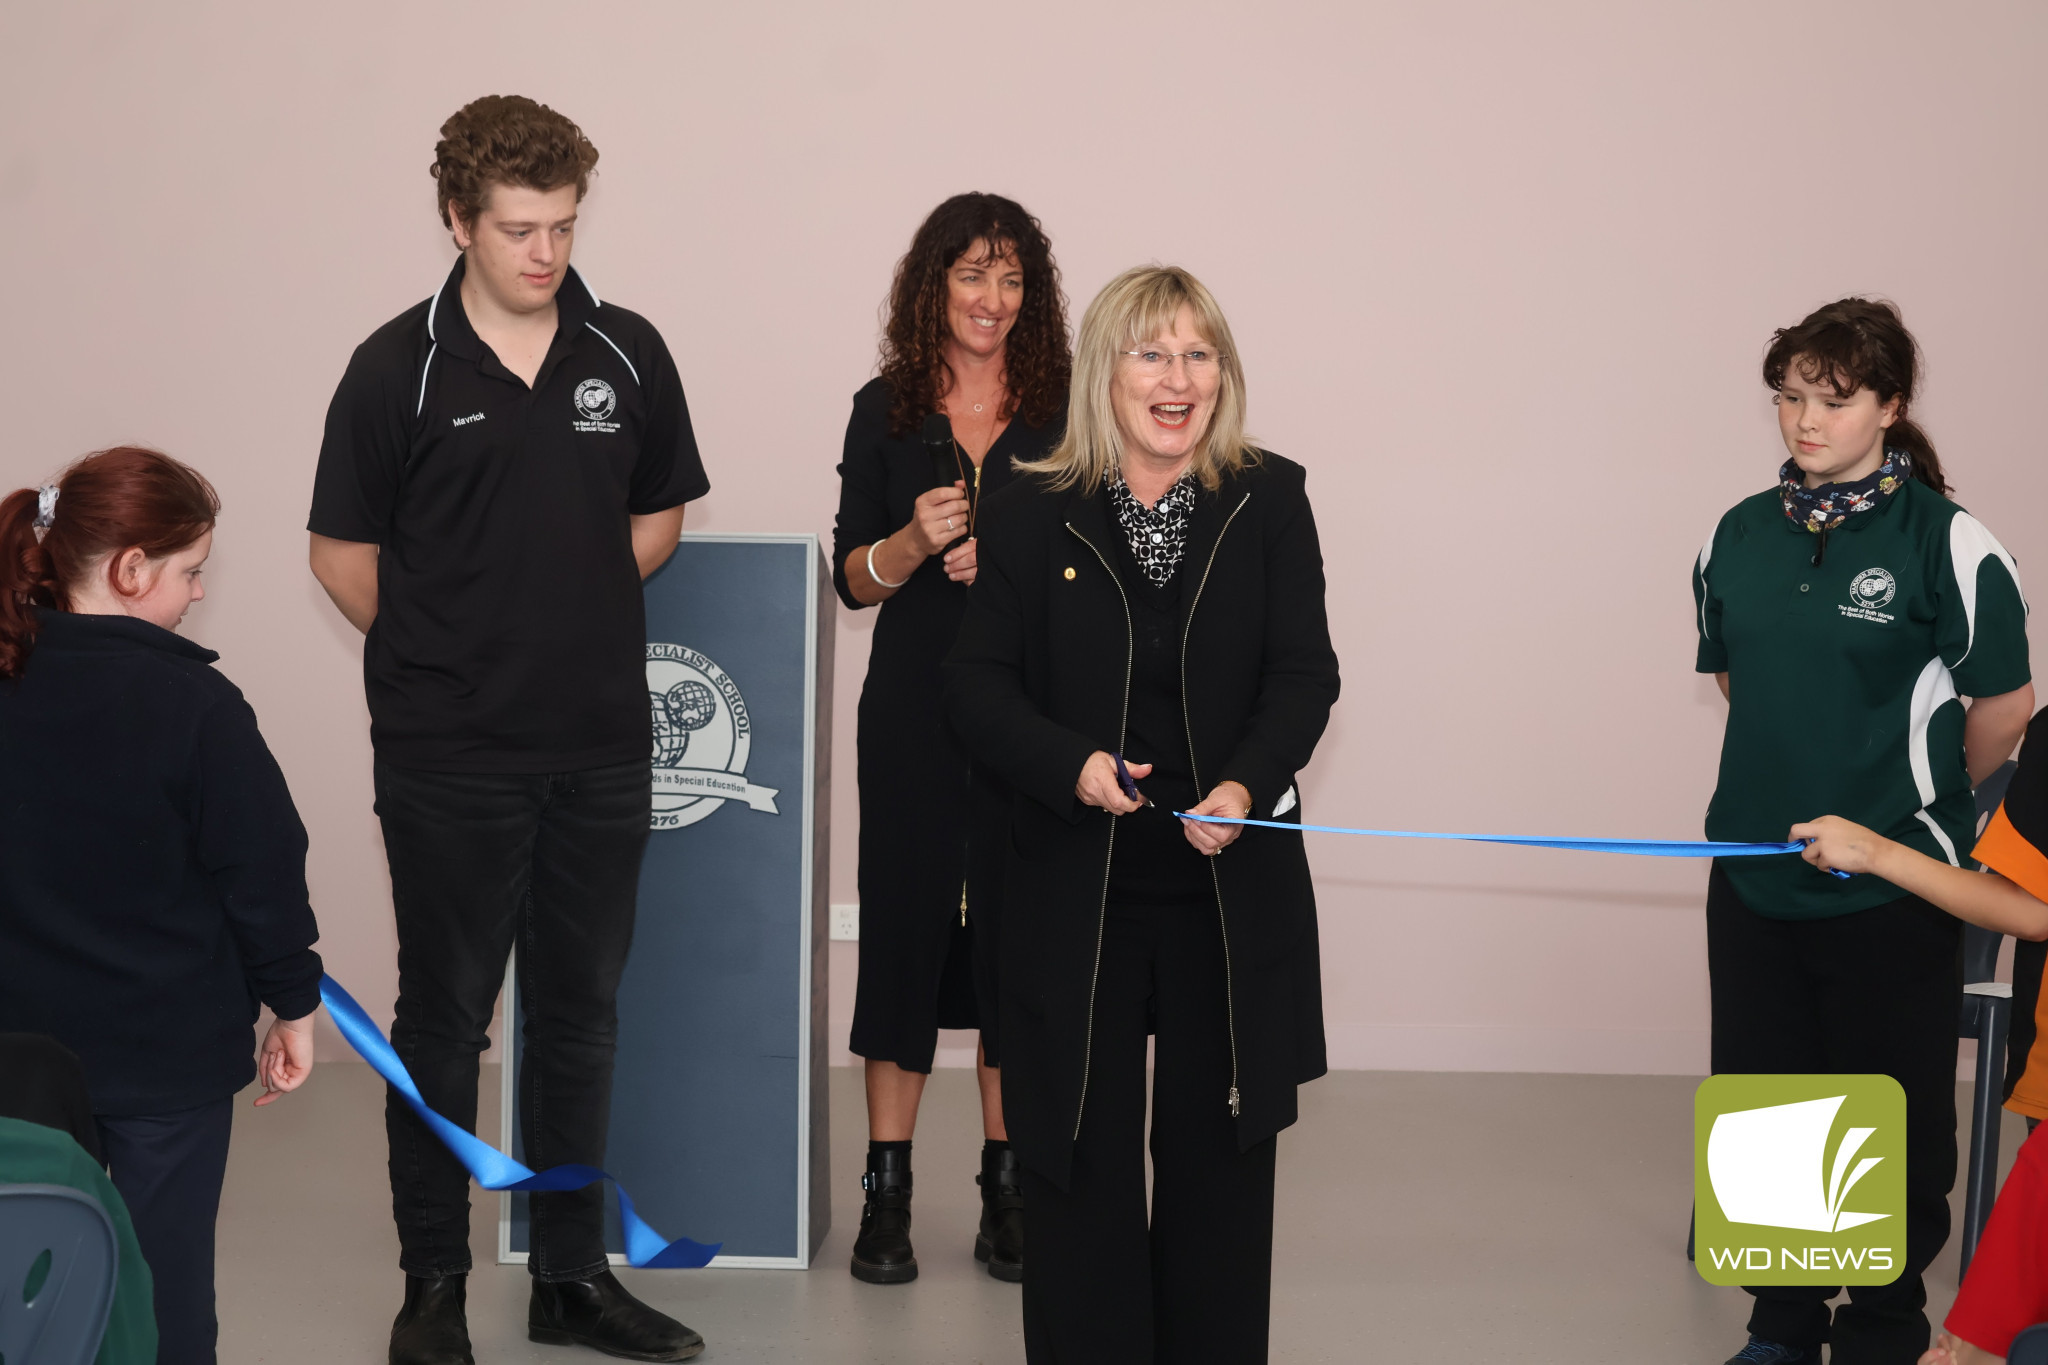 Well deserved: Ms Tierney joined staff, students, stakeholders, friends and family to cut the ribbon declaring Hampden Specialist School’s new campus as officially open.